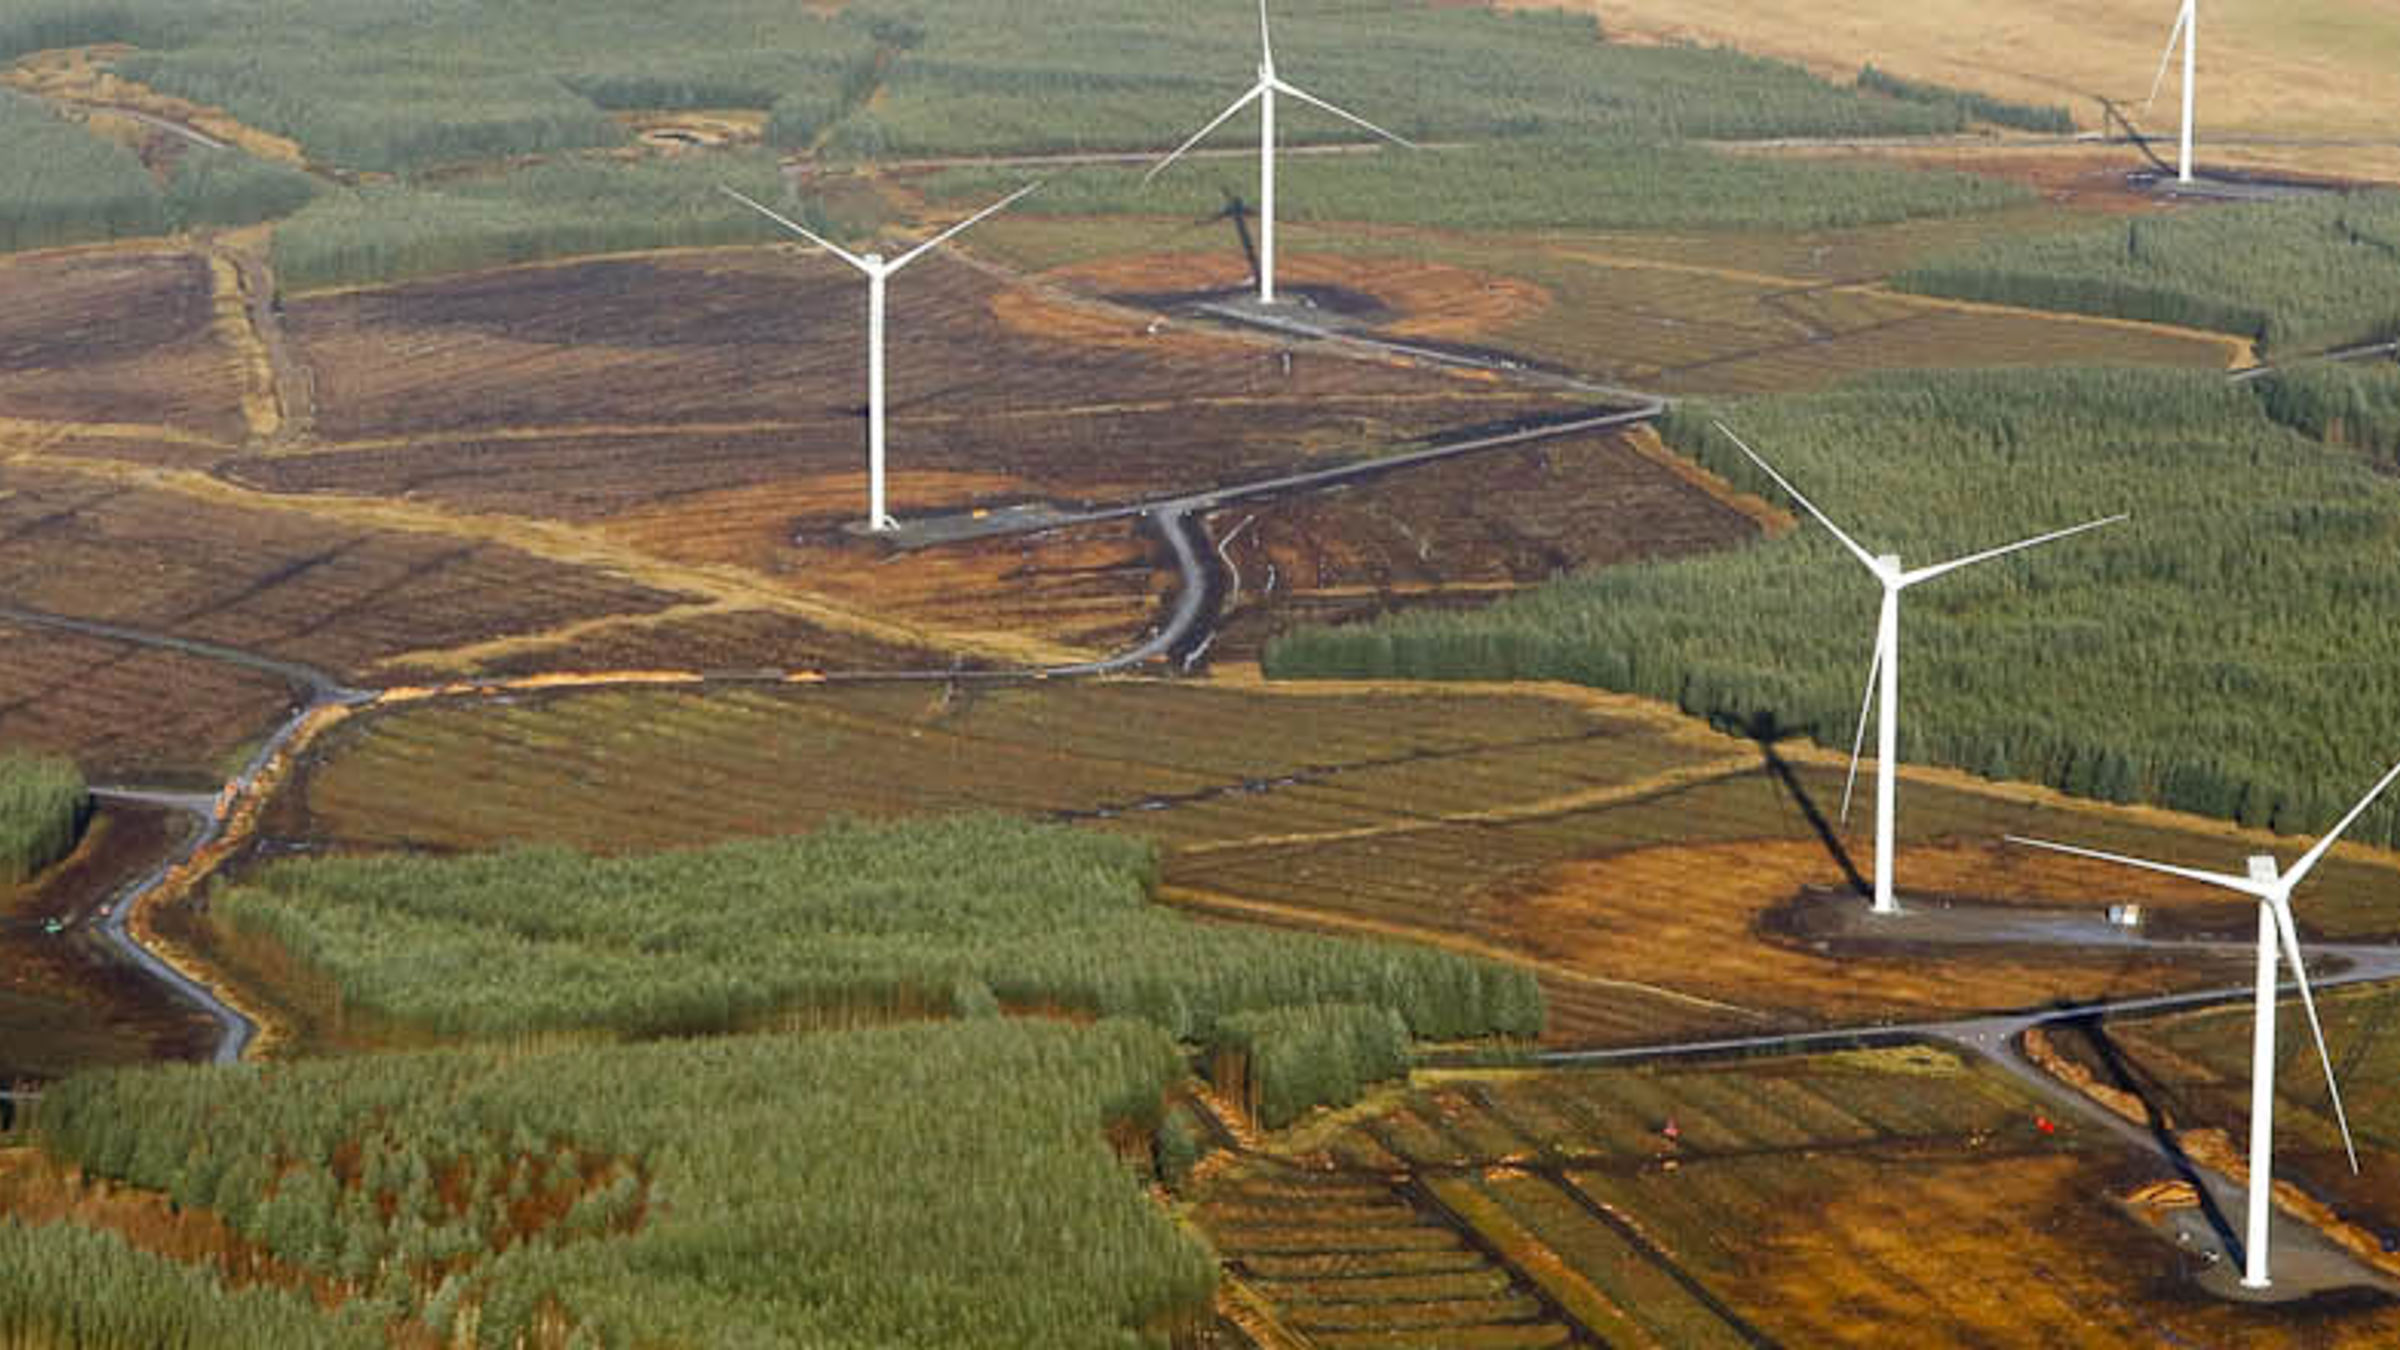 Andershaw windfarm from the sky